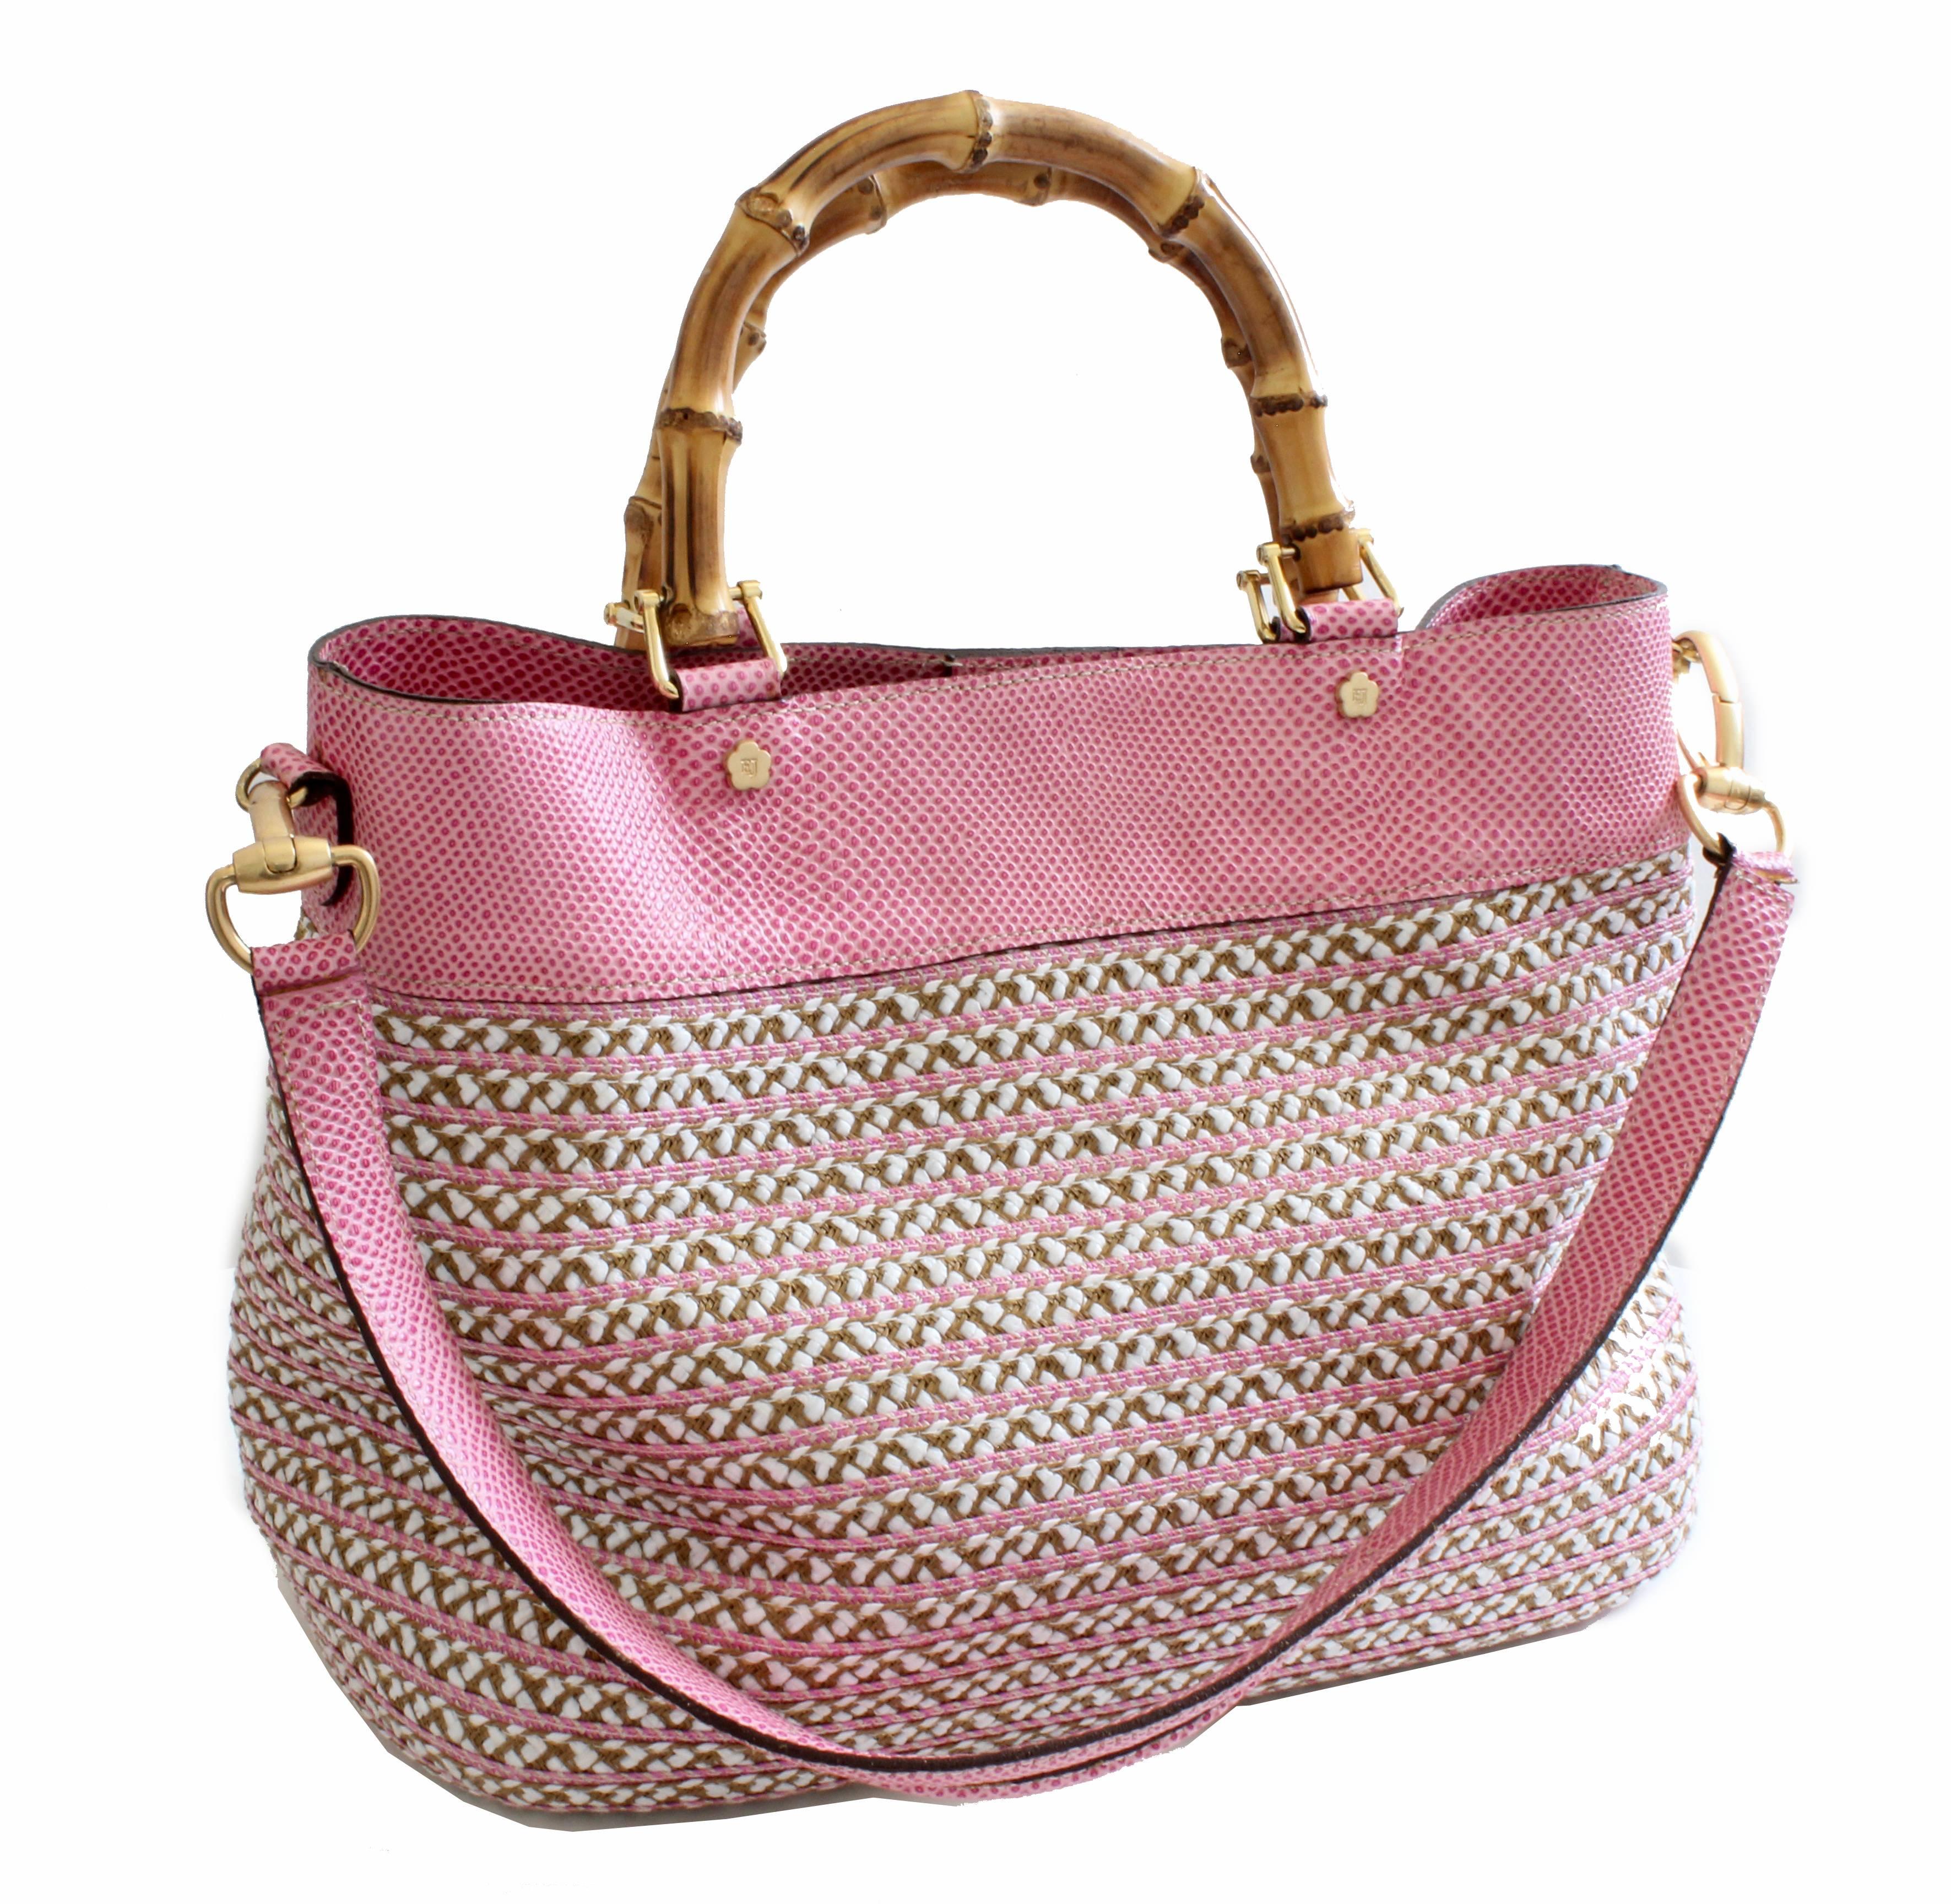 This fabulous bag is from Eric Javits New York.  Called the Analu Squishee Tote, this version features a pink and white weave, with pink lizard stamped leather trim.  In very good preowned condition with minimal signs of prior wear.  Dimensions: